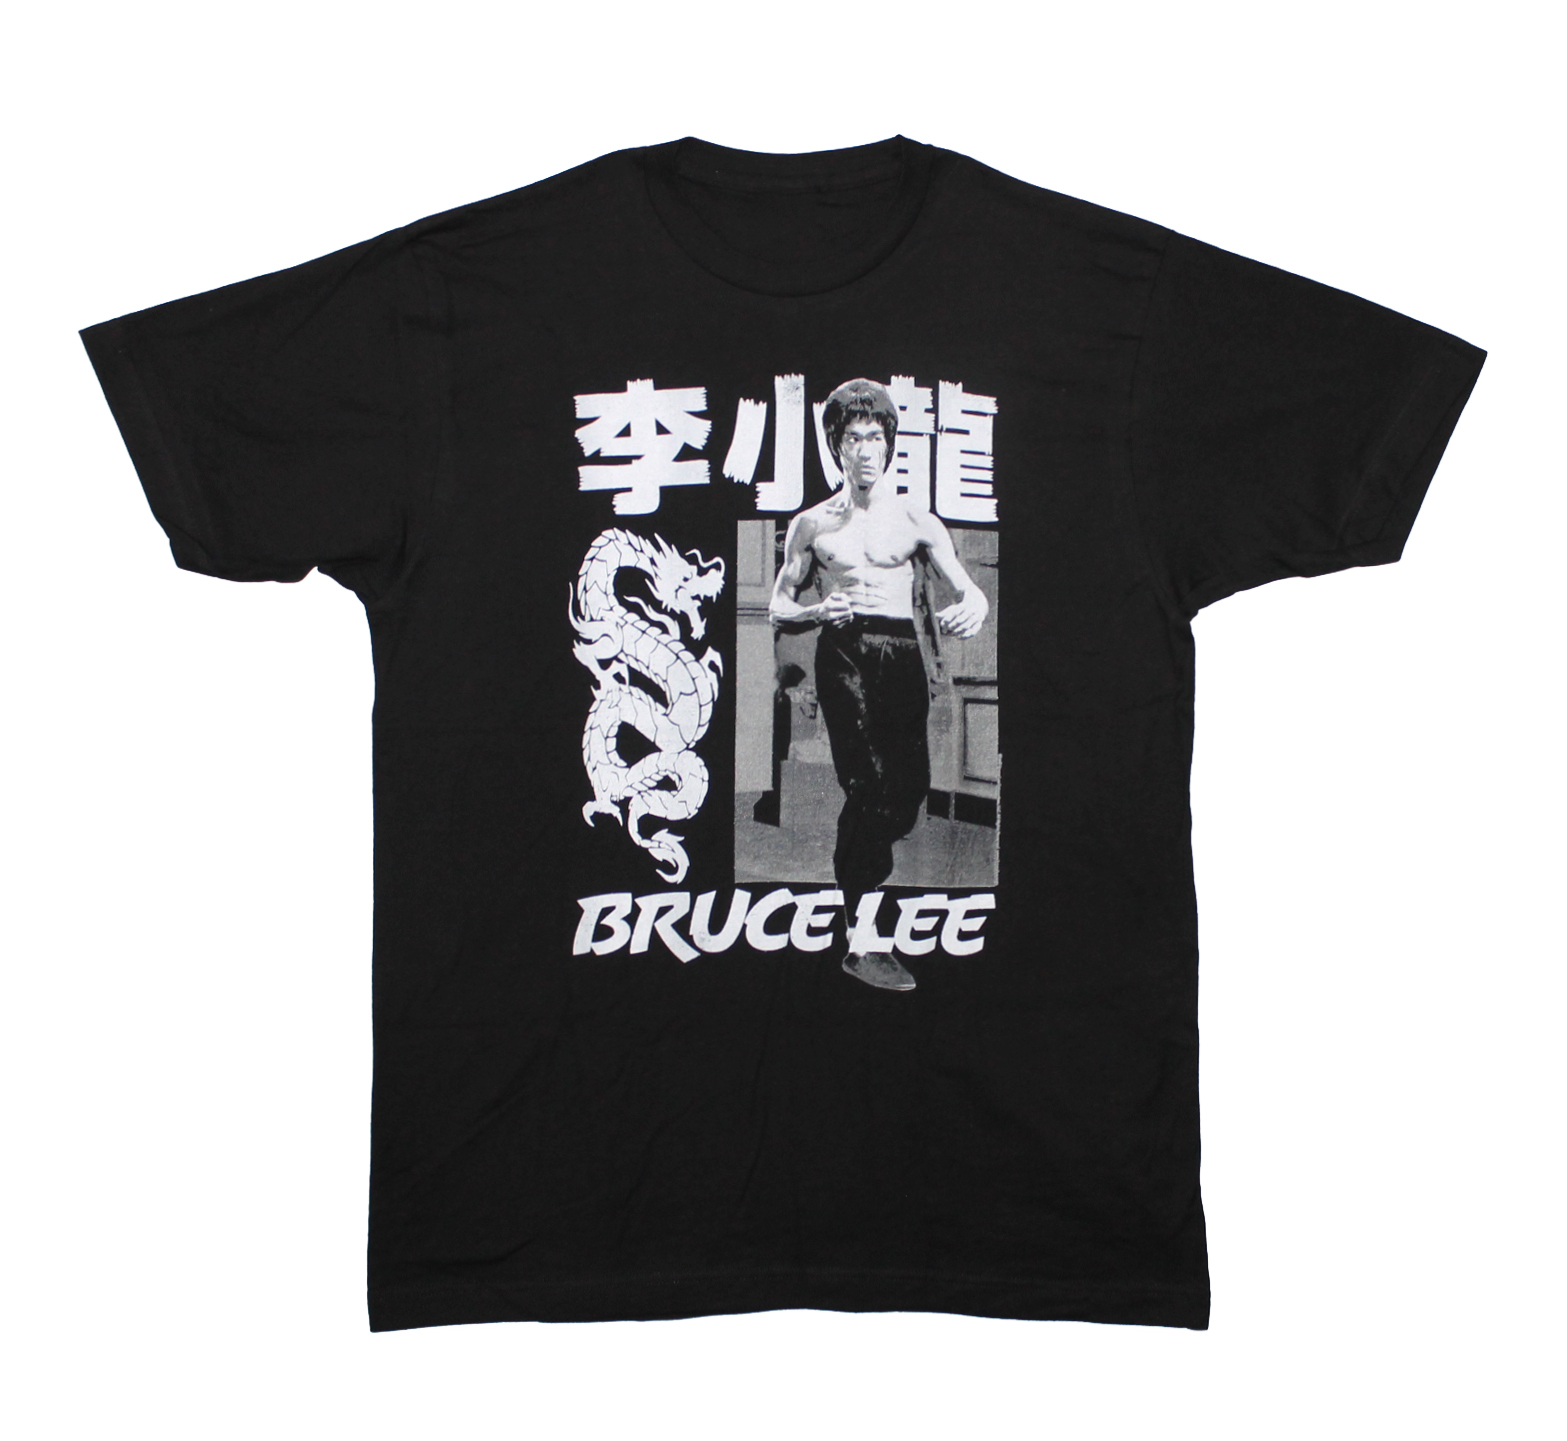 Bruce Lee Chinese Name - Black - Vancouver Rock Shop